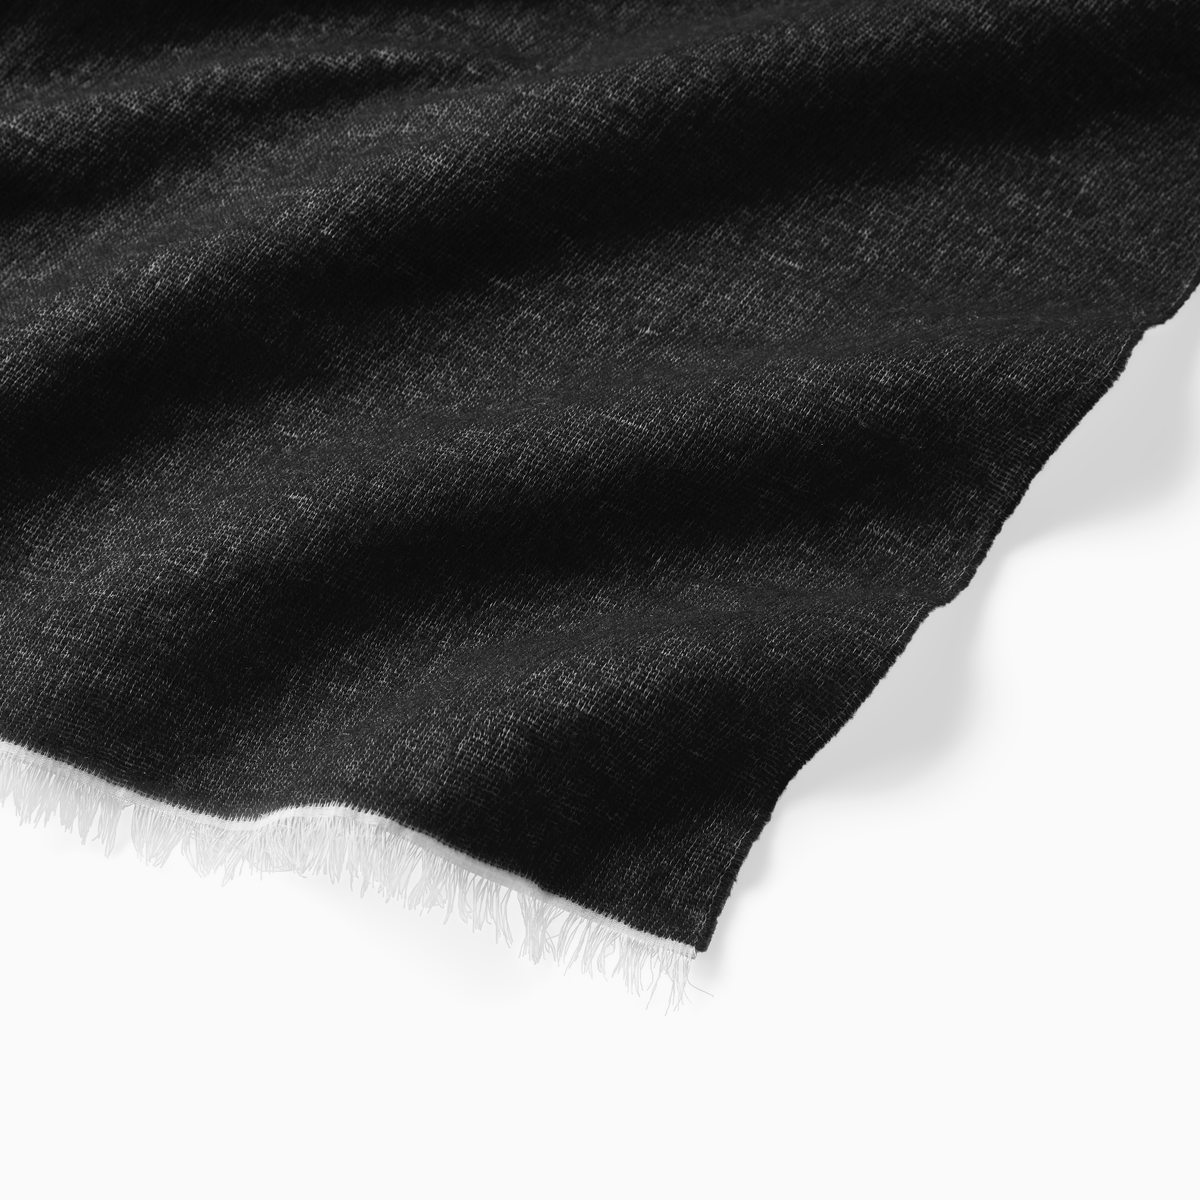 Detail View of Sferra Monterosa Throws in Black Color